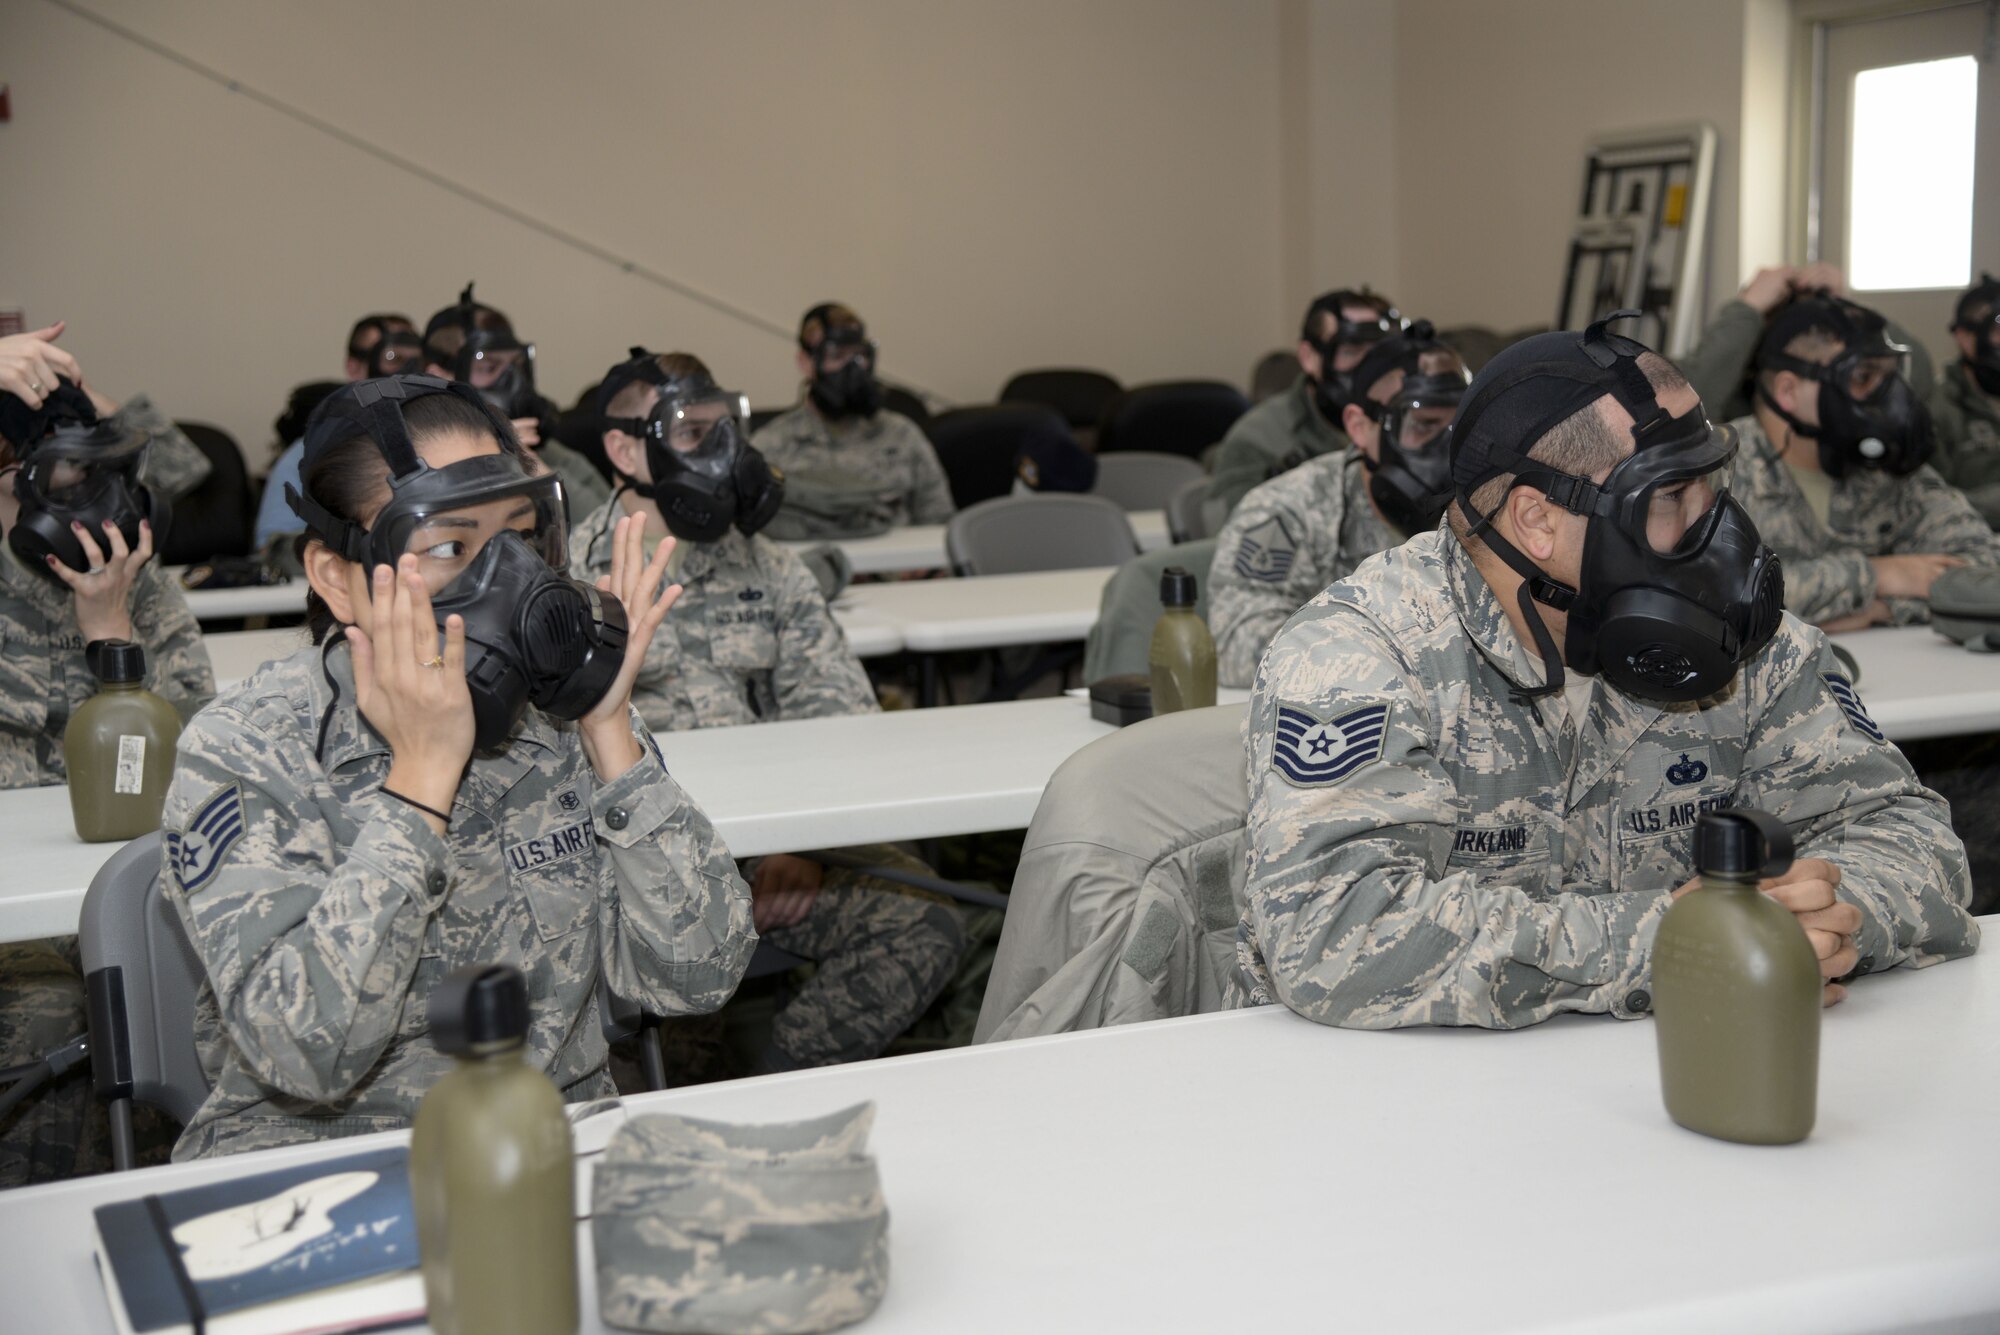 Team Dover Airmen don gas masks during a Chemical, Biological, Radiological and Nuclear (CBRN) training session Jan. 31, 2018, at Dover Air Force Base, Del. During the training, Airmen were taught how to properly wear their gas mask and how to test for a good seal. (U.S. Air Force photo by Staff Sgt. Aaron J. Jenne)